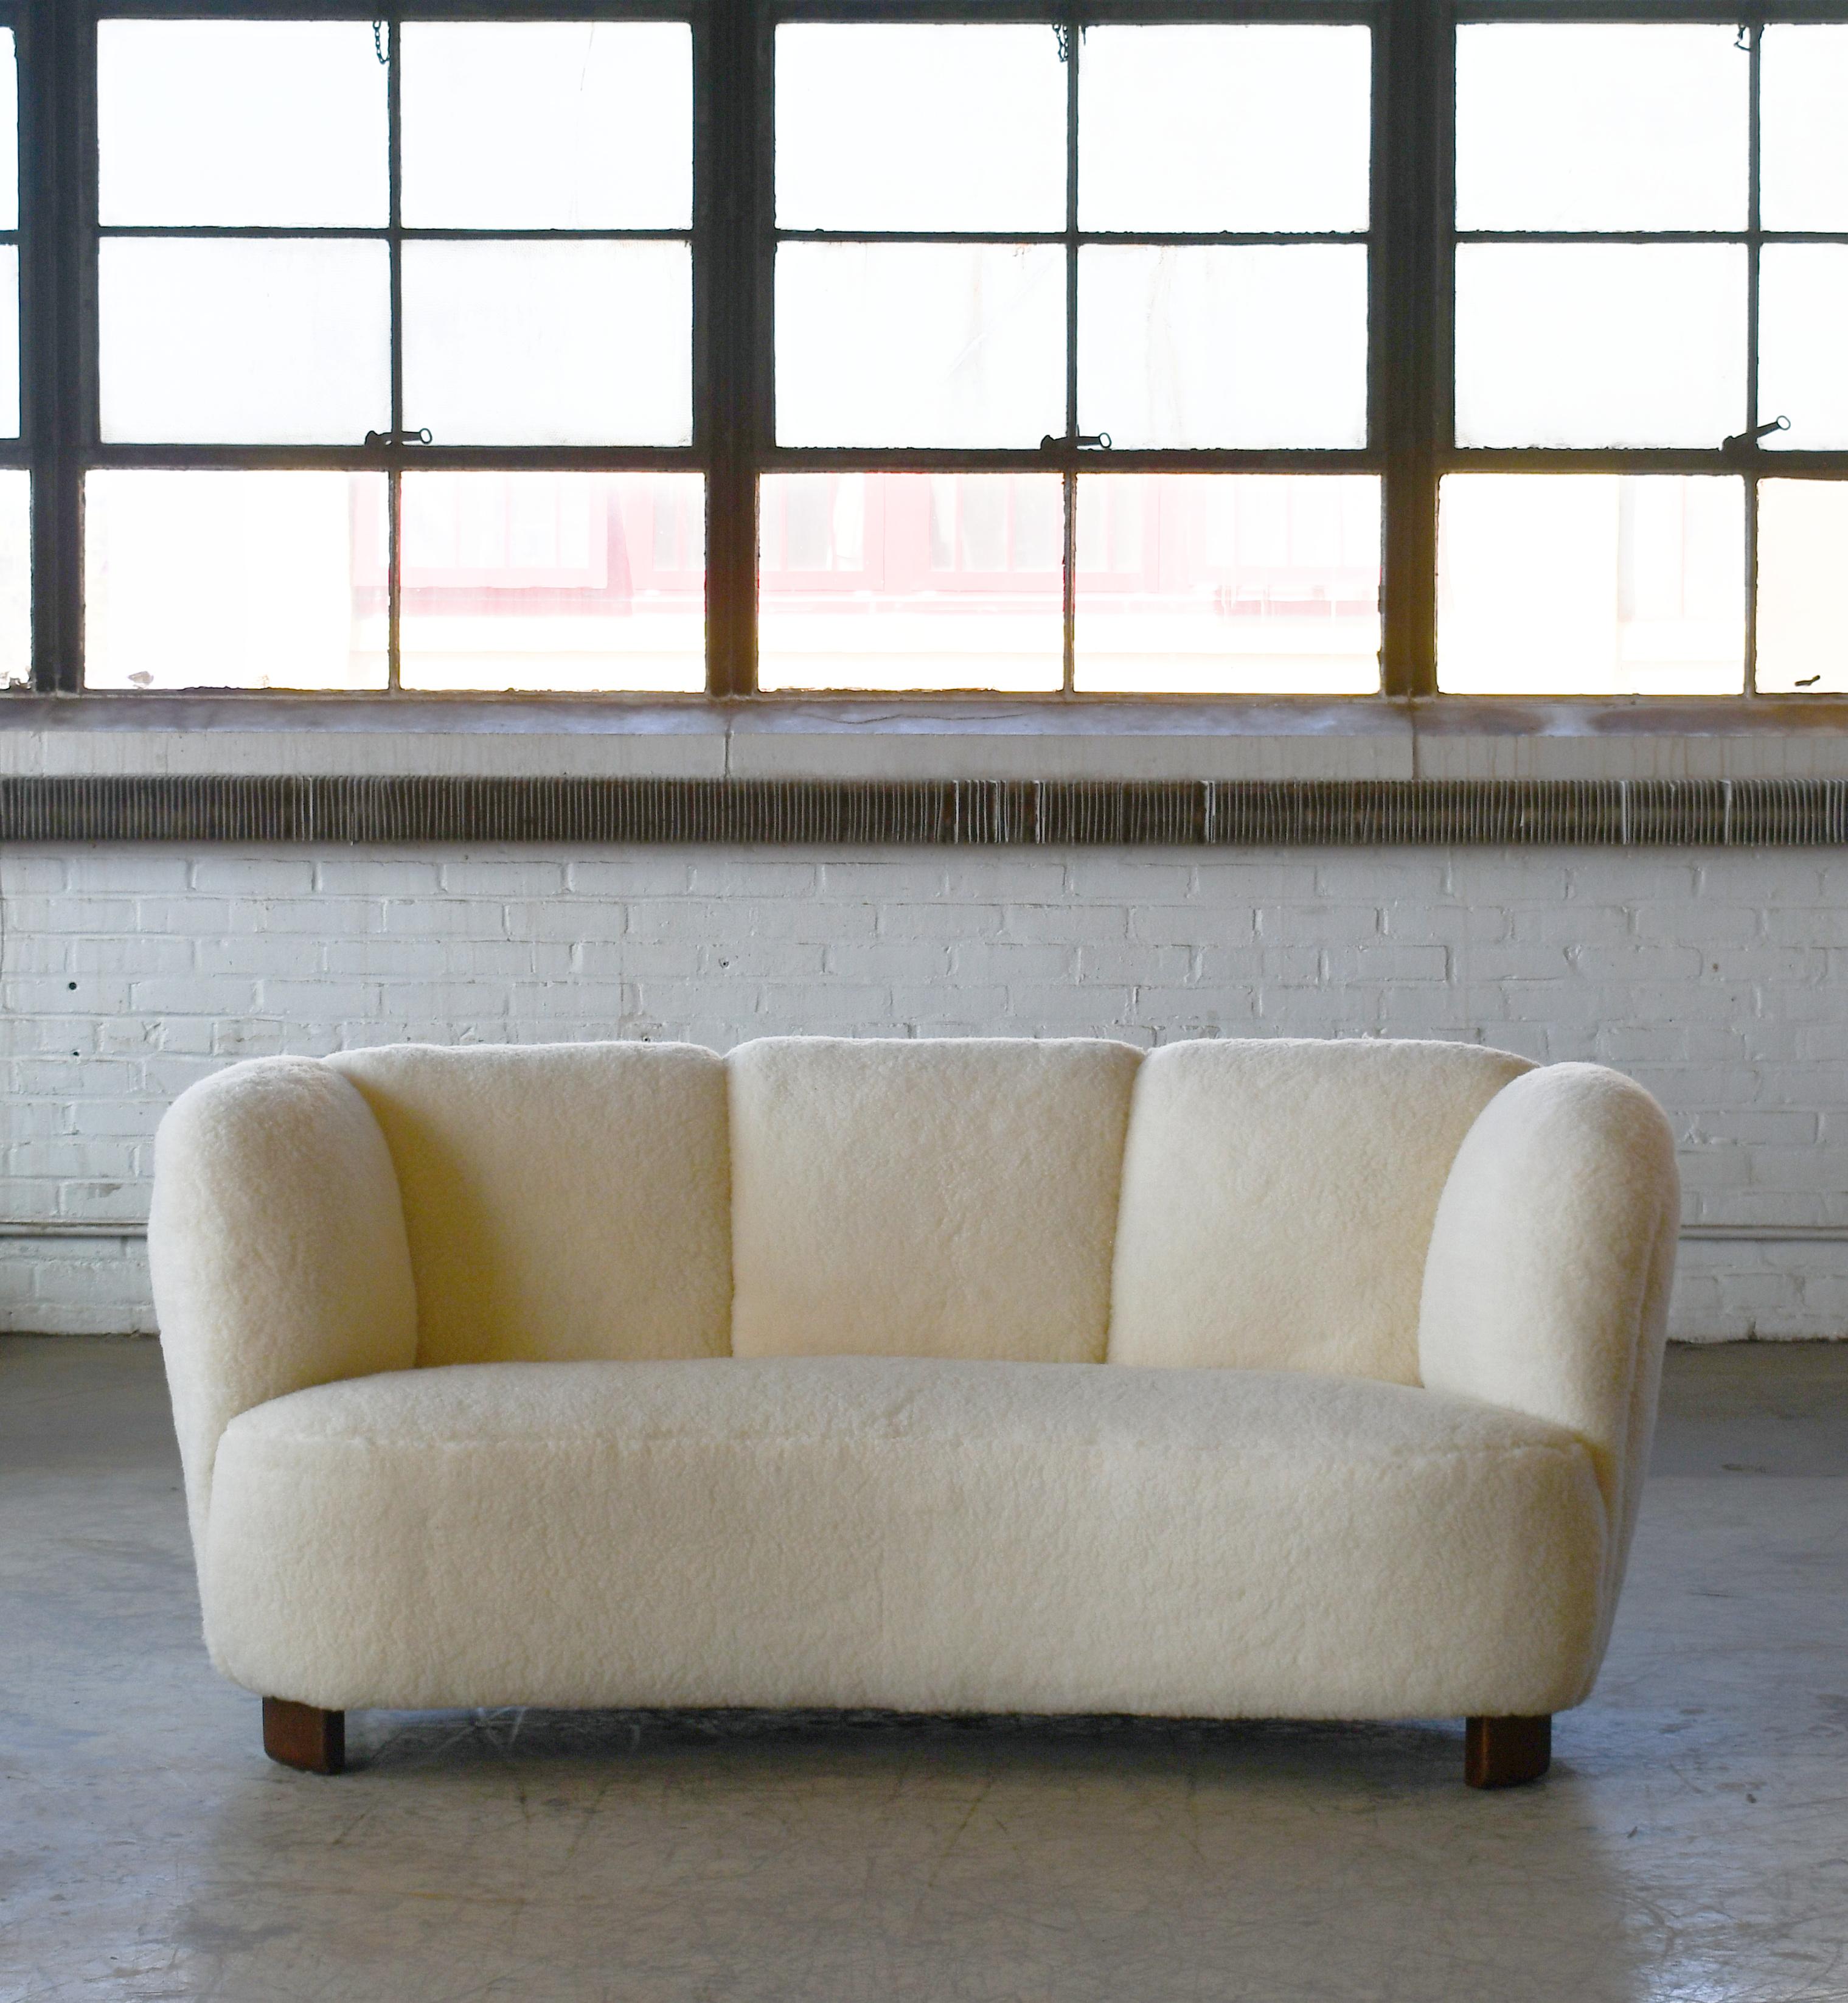 Danish 1940s Banana Shaped Curved Loveseat in White Lambswool For Sale 2